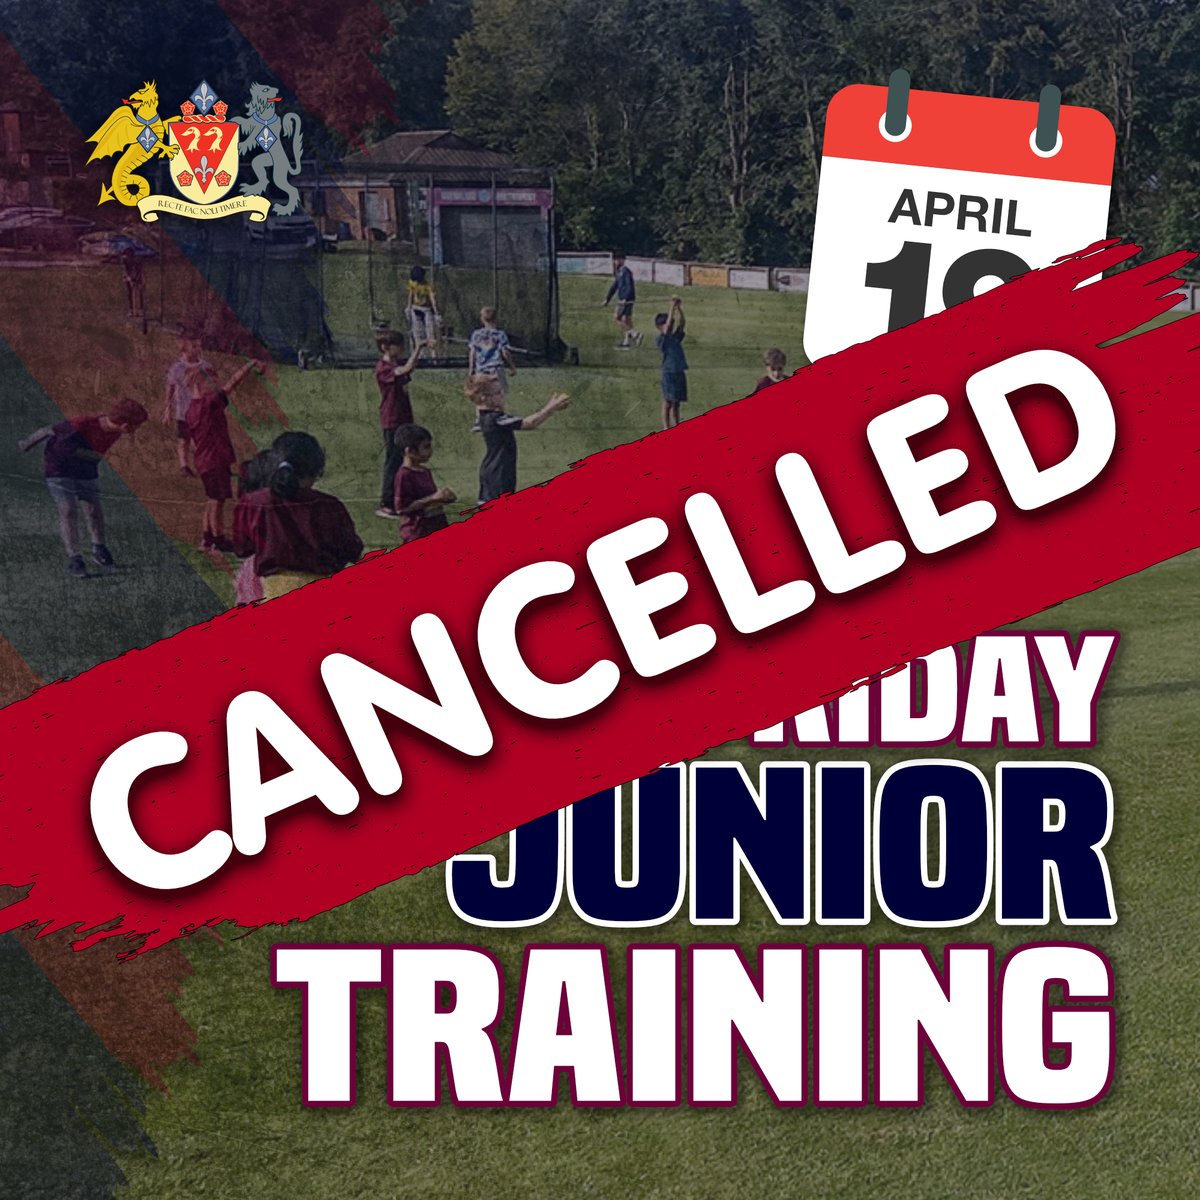 Junior cricket training this Friday (April 19) is OFF. However, the club will be open from 6pm for parents to pick up junior membership forms & sign up their children, and also collect our seasonal welcome letter, which contains important information for the rest of the season.